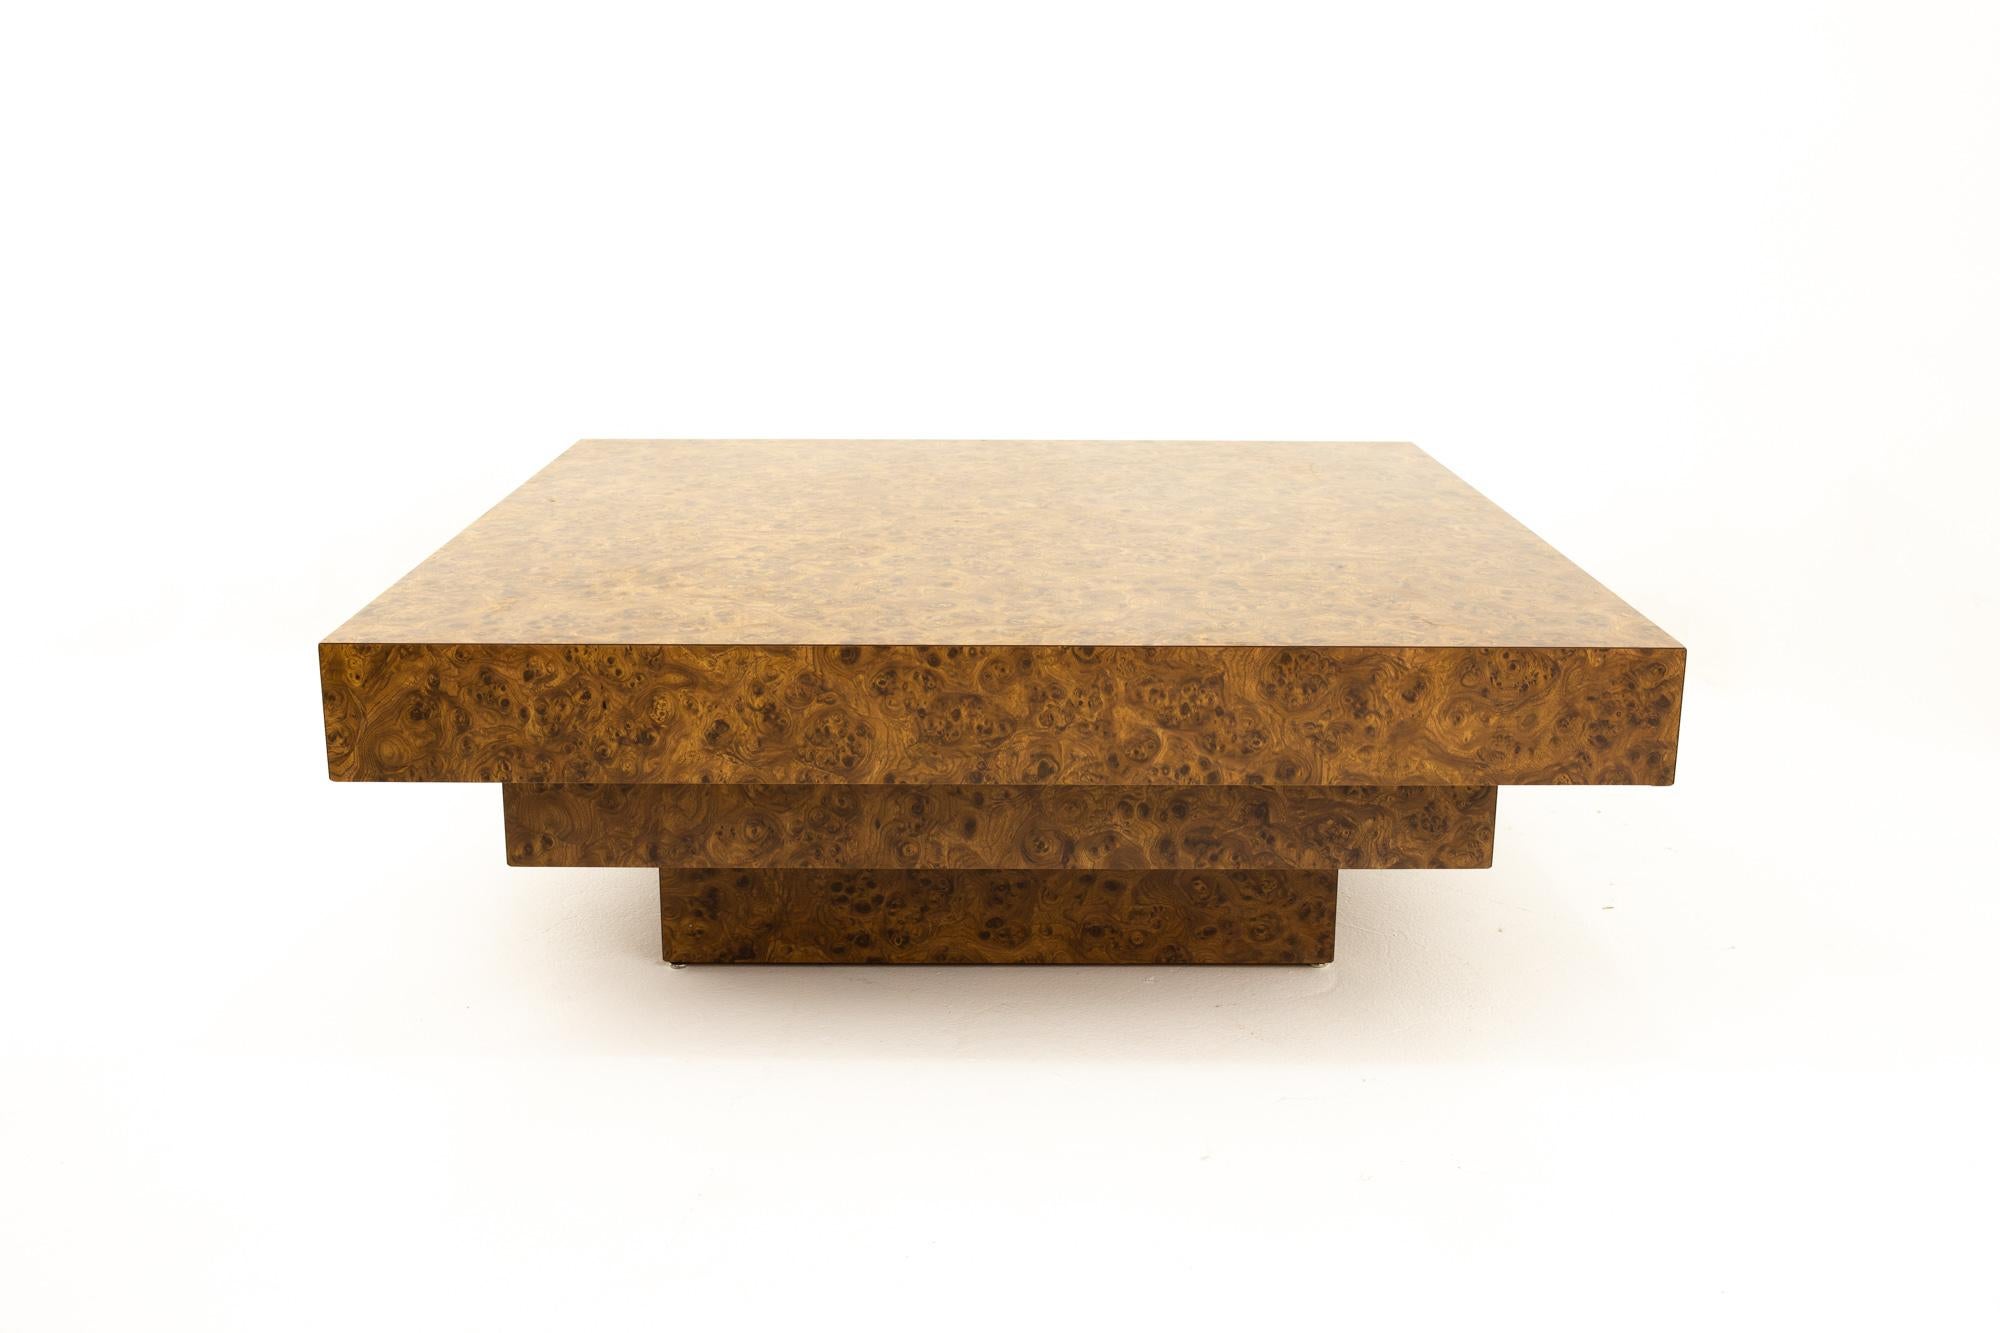 Milo Baughman style midcentury burlwood formica 3-tier coffee table.
Table measures: 48 wide x 48 deep x 16 high

All pieces of furniture can be had in what we call restored vintage condition. This means the piece is restored upon purchase so